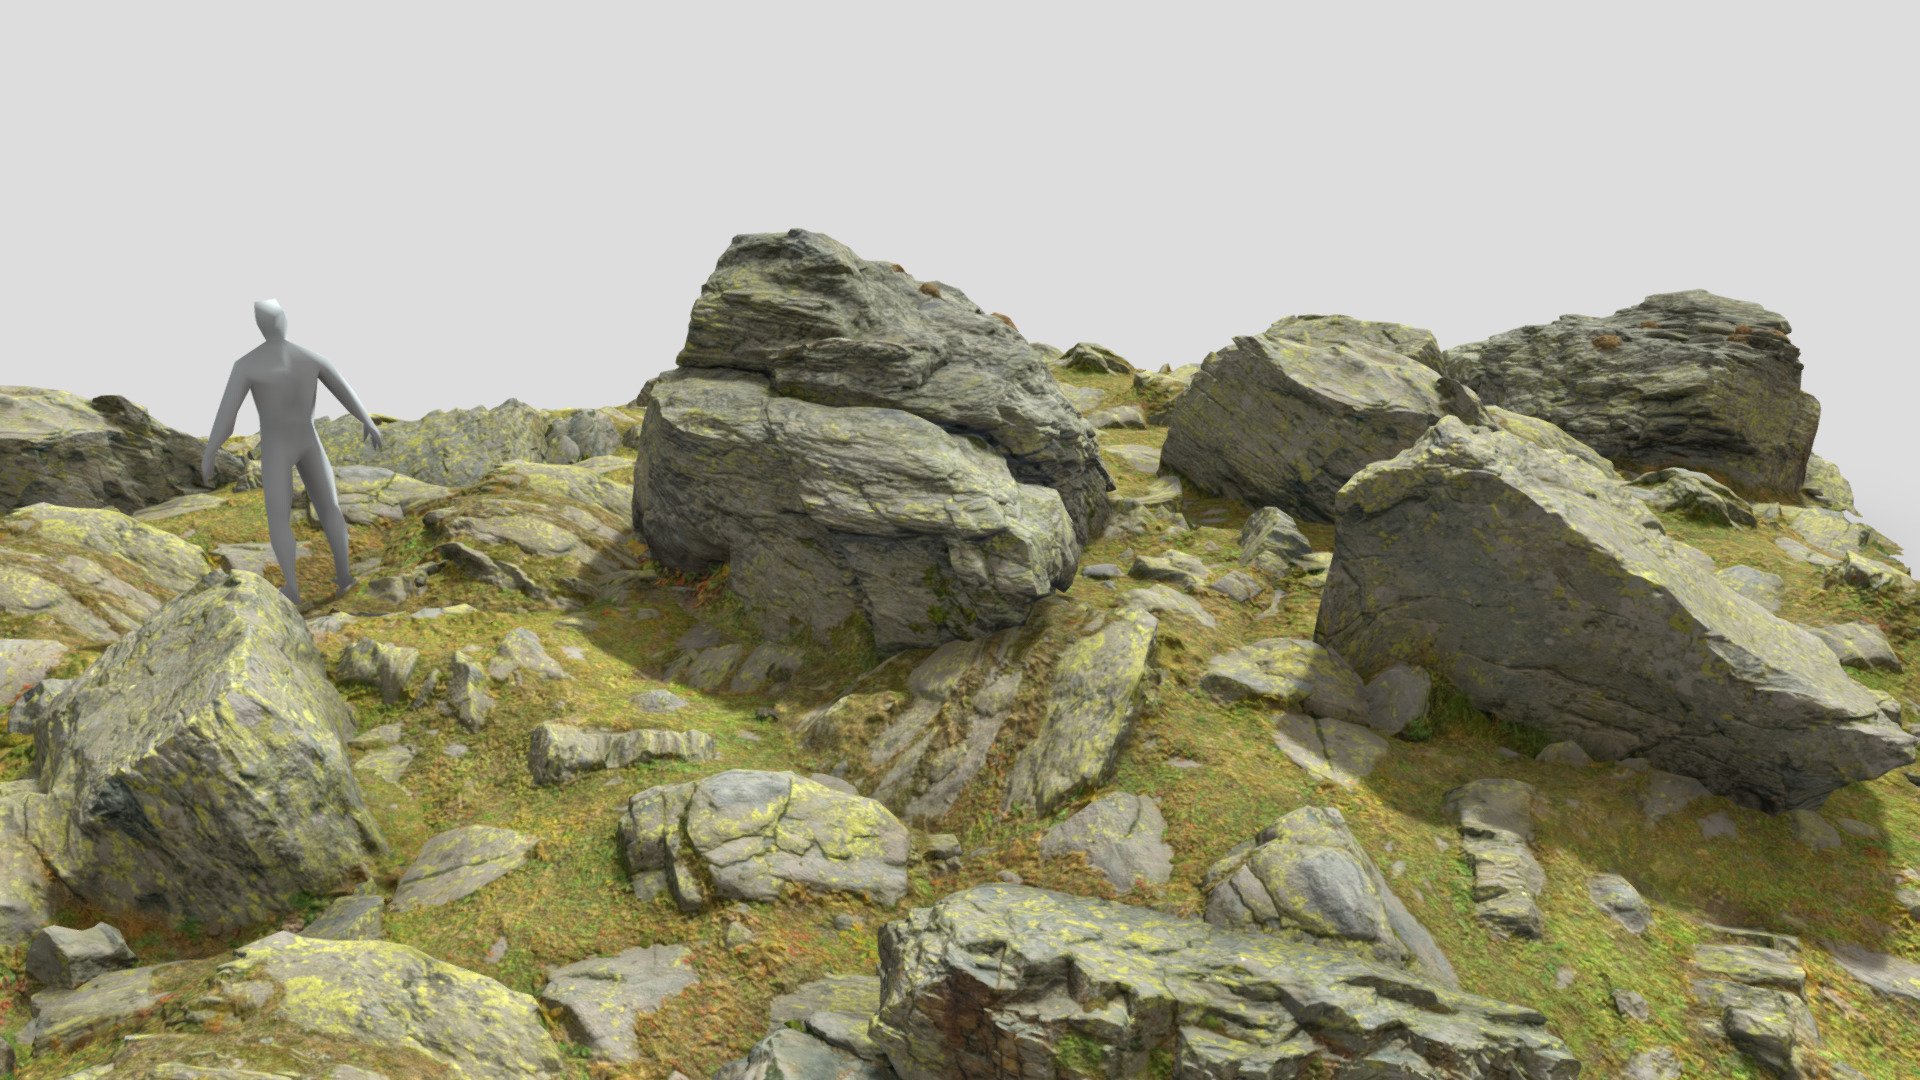 A example scene from some assets you can find in my portfolio:




https://sketchfab.com/3d-models/pbr-rock-alps-grassland-pack-0b09d2dc09b444d082092ffdf944dbf8

https://sketchfab.com/3d-models/pbr-rock-alps-grassland-pack-4ab72db2bddb47d89930d71b56a0c8de

Realistic Rocks Stones Scenery Assembly Alps Scan - Rocks Stones Scenery Assembly Alps Scan - 3D model by Per's Scan Collection (@perz_scans) 3d model